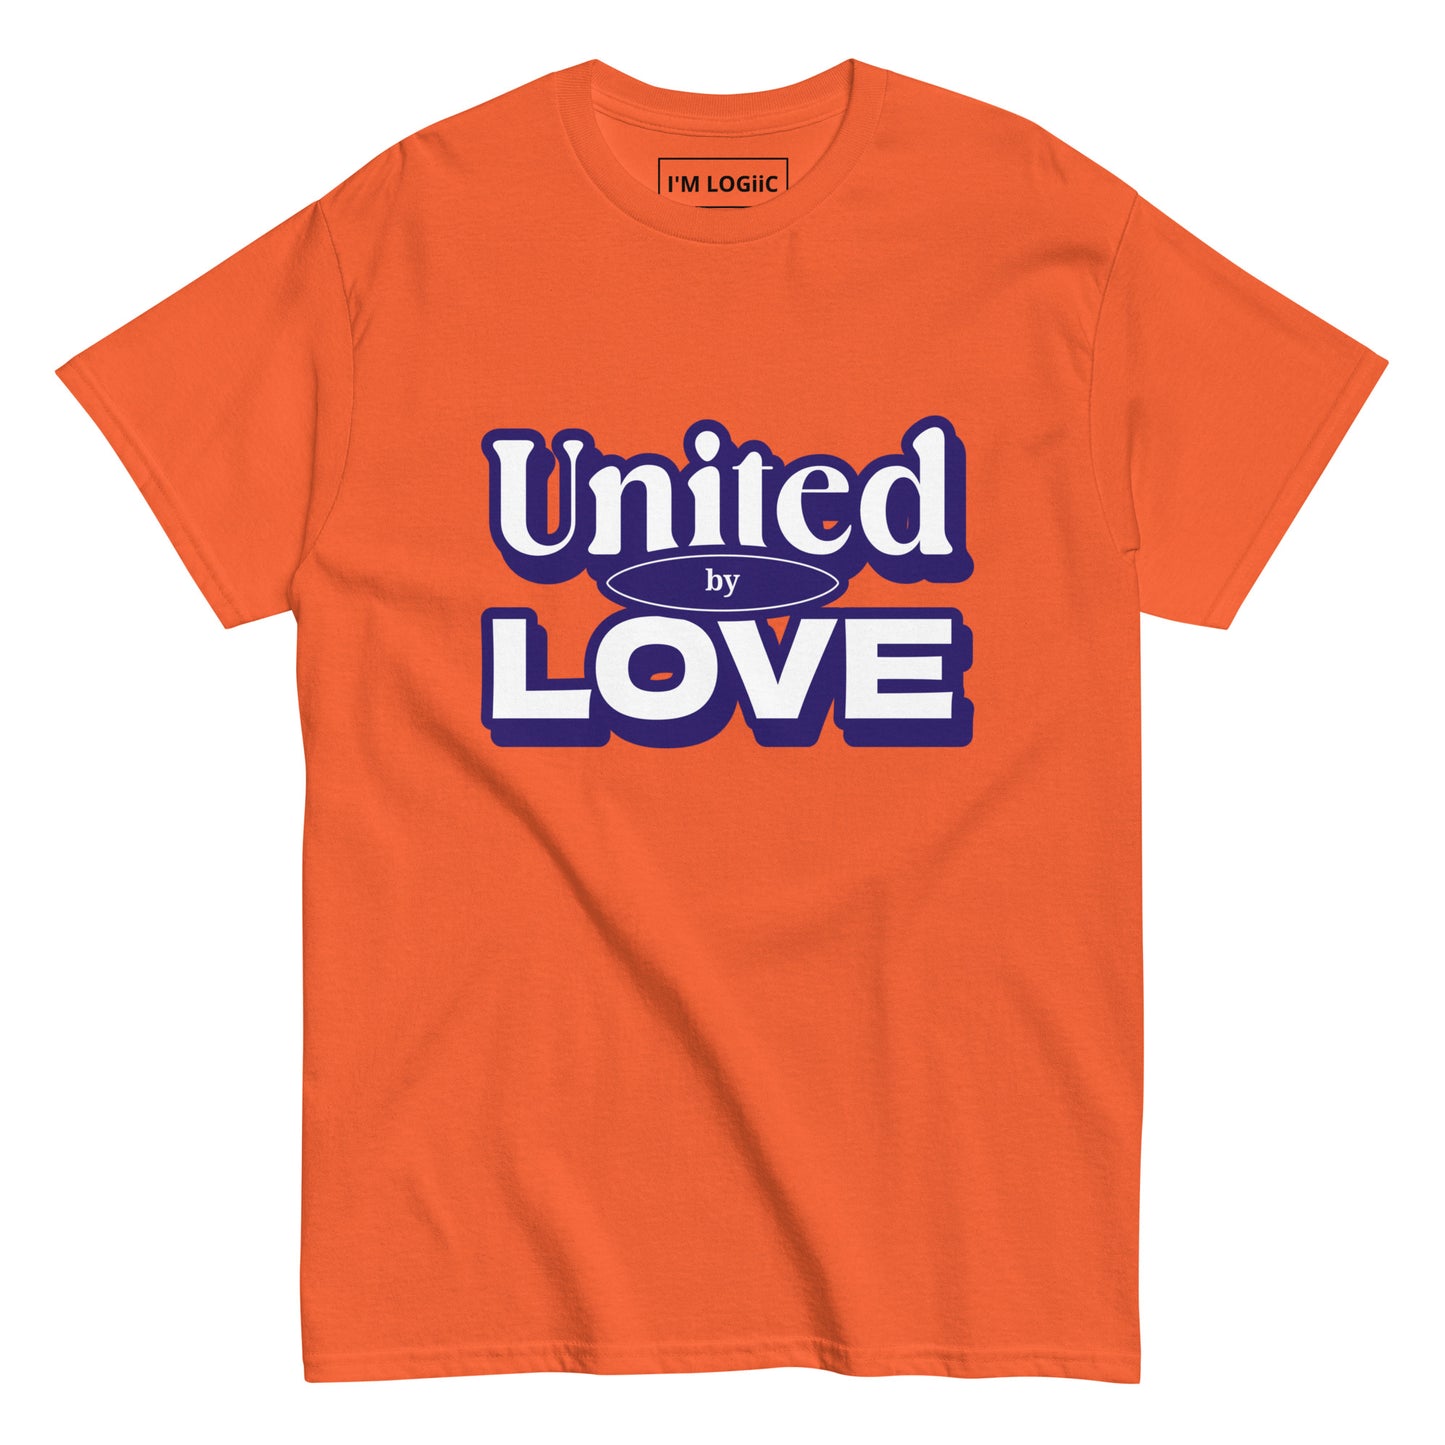 United by Love classic tee